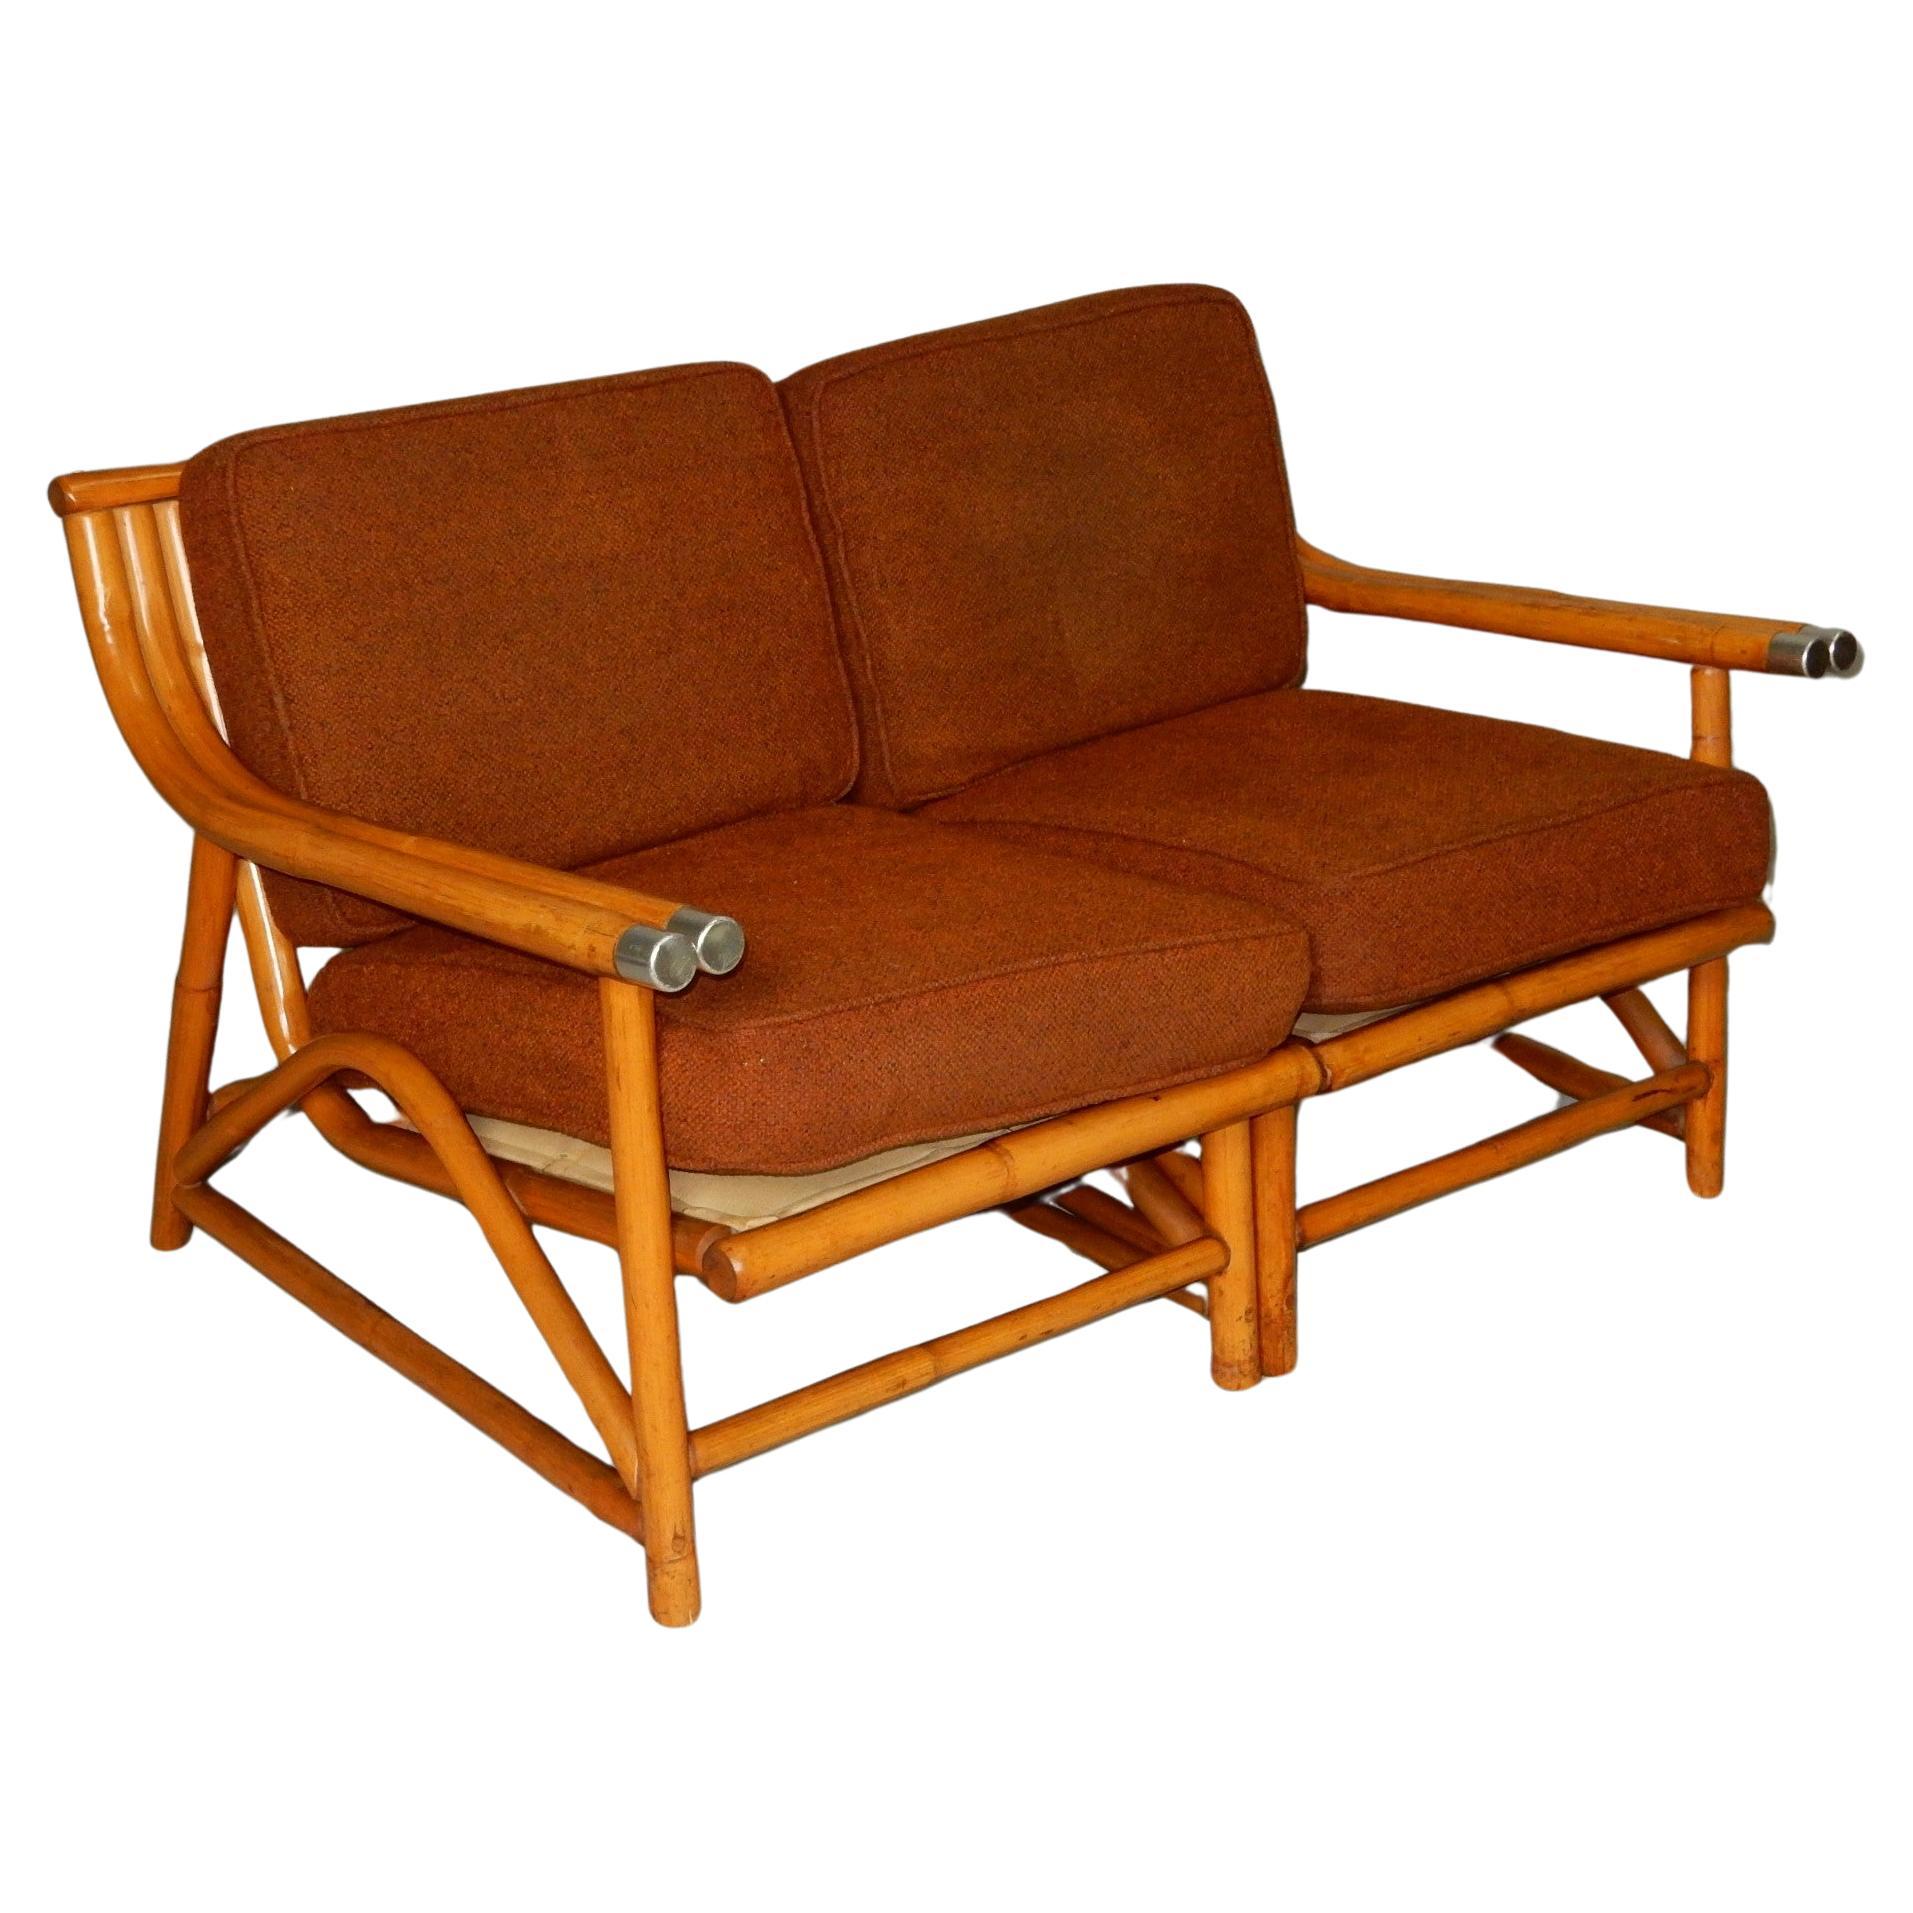 American 1950's Ficks Reed Rattan Split Settee or Lounge Chairs  For Sale